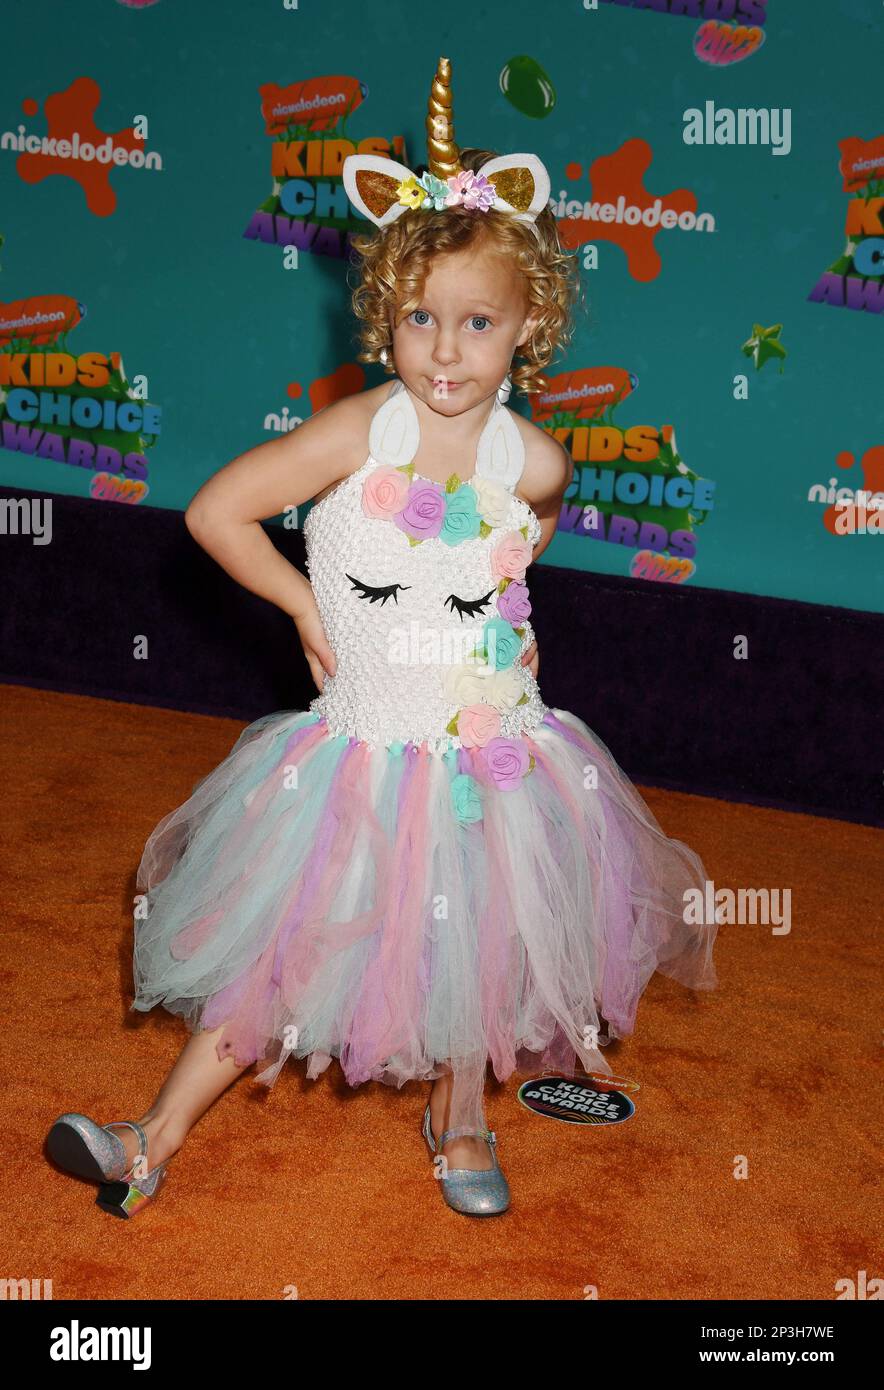 Los Angeles, California, USA. 04th Mar, 2023. August Michael Peterson attends Nickelodeon's 2023 Kids' Choice Awards at Microsoft Theater on March 04, 2023 in Los Angeles, California. Credit: Jeffrey Mayer/Jtm Photos/Media Punch/Alamy Live News Stock Photo